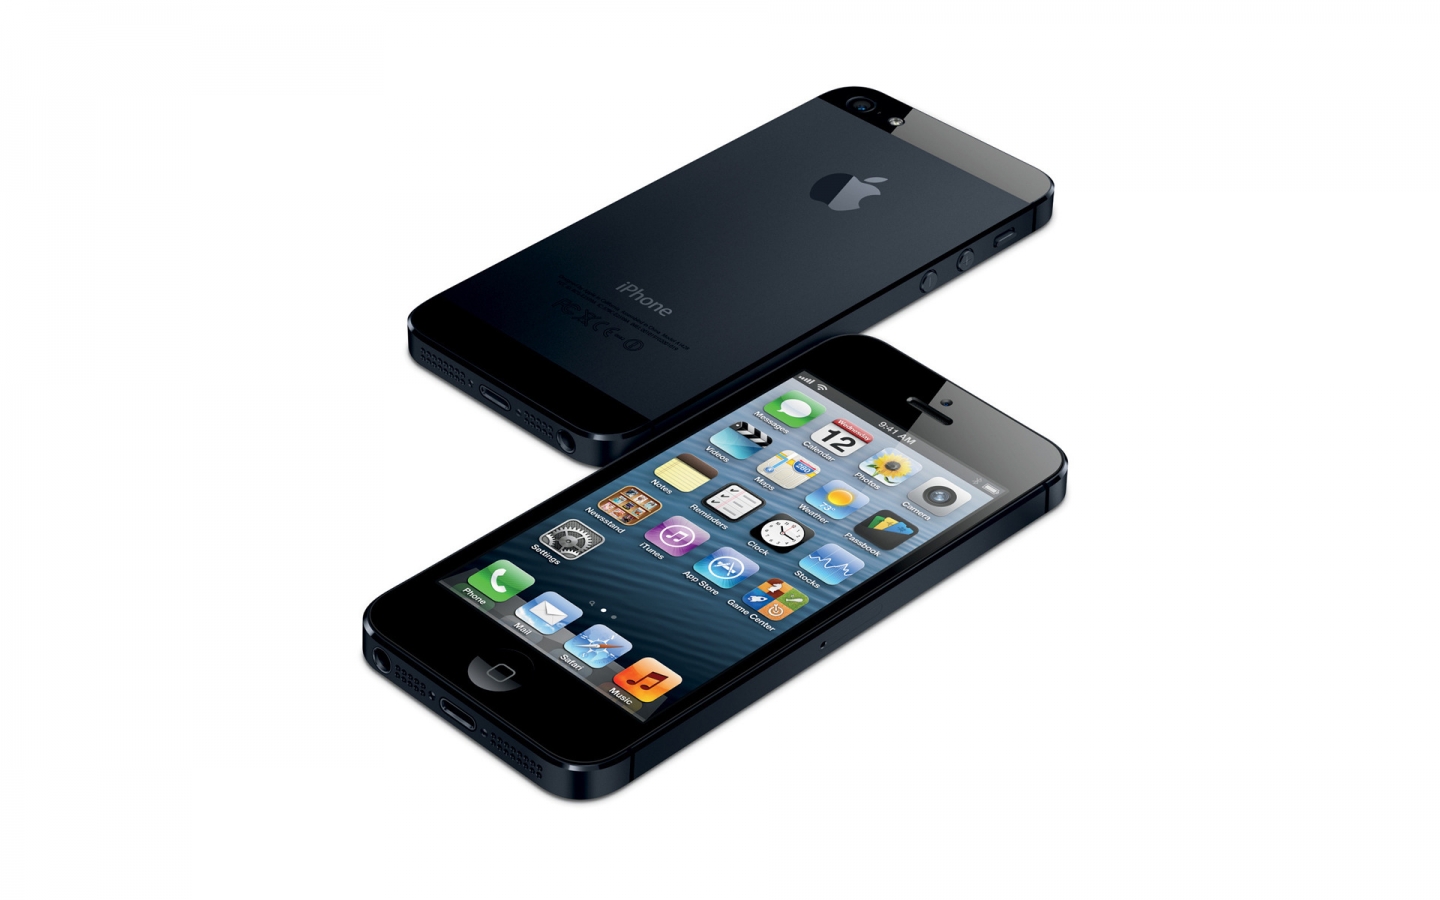 Black iPhone 5 for 1440 x 900 widescreen resolution